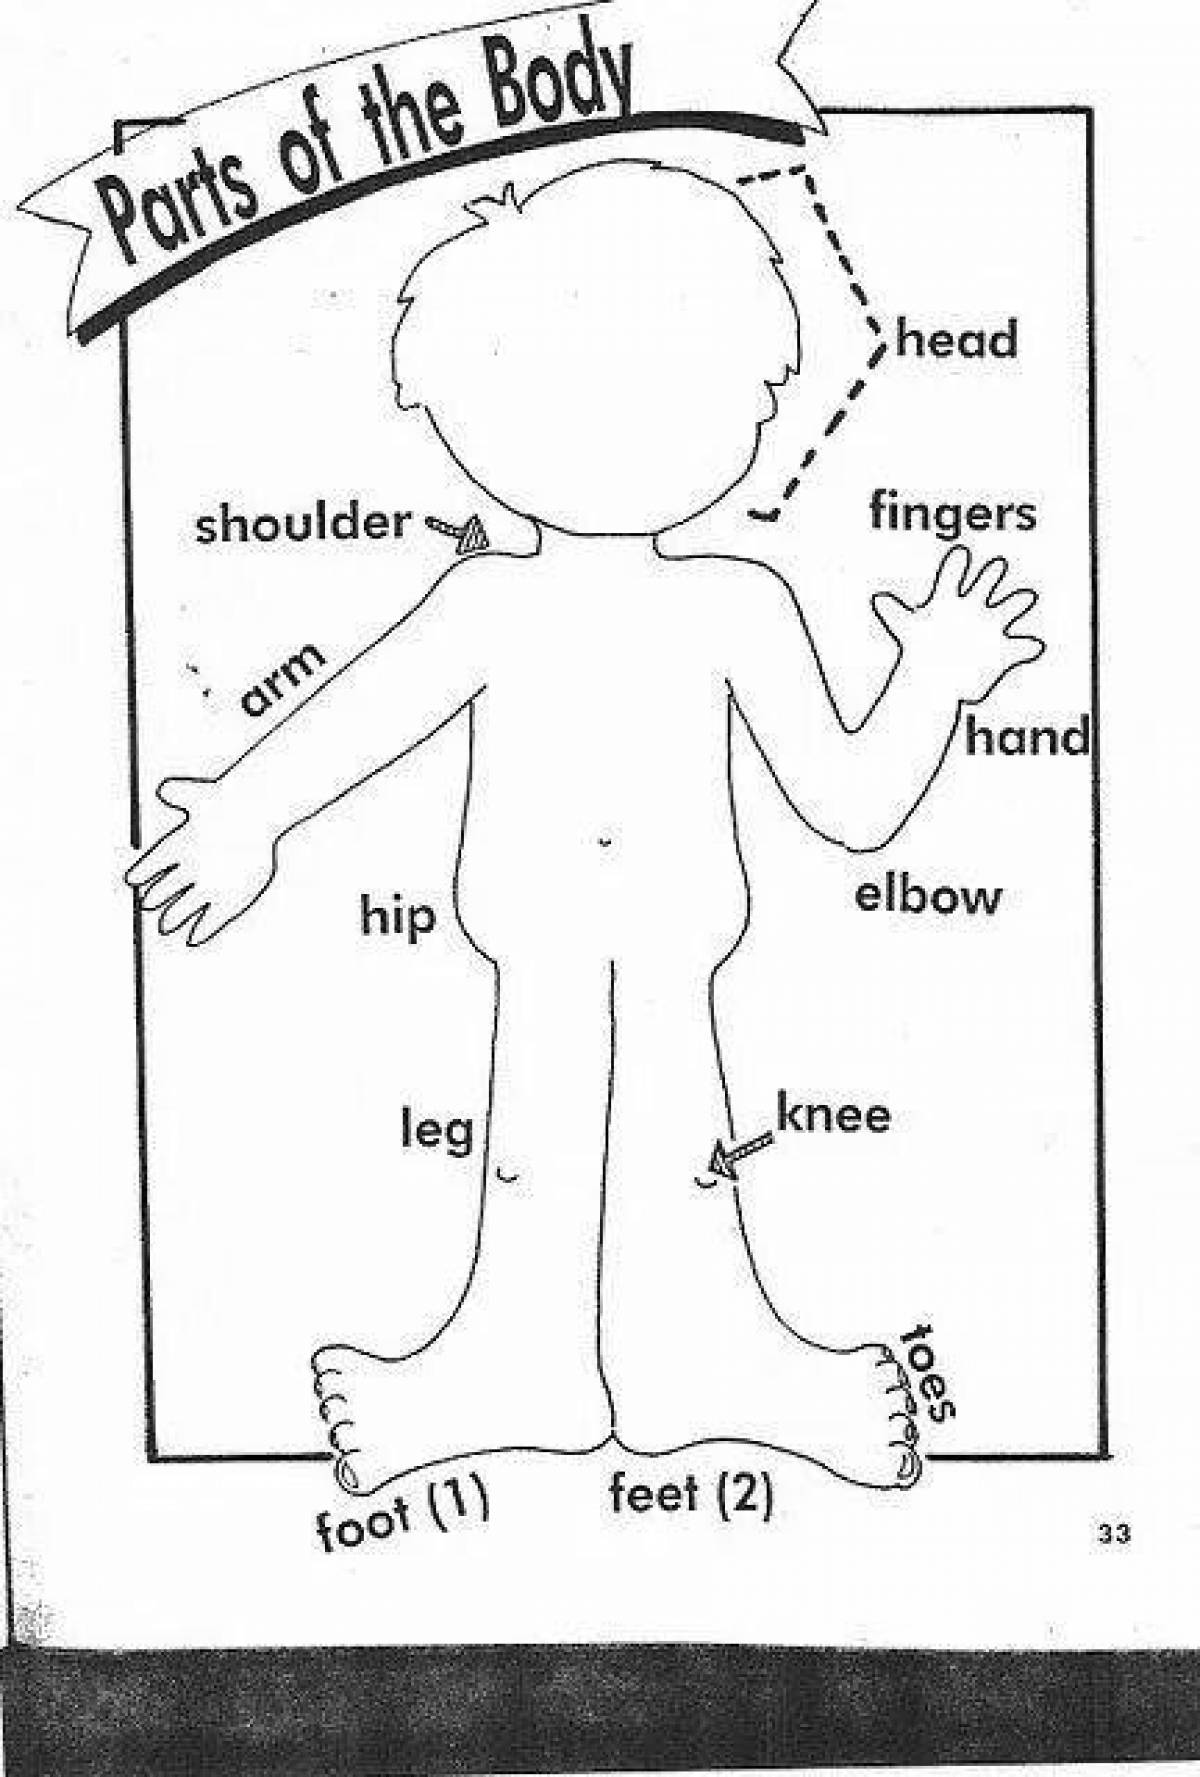 For children English body parts #1